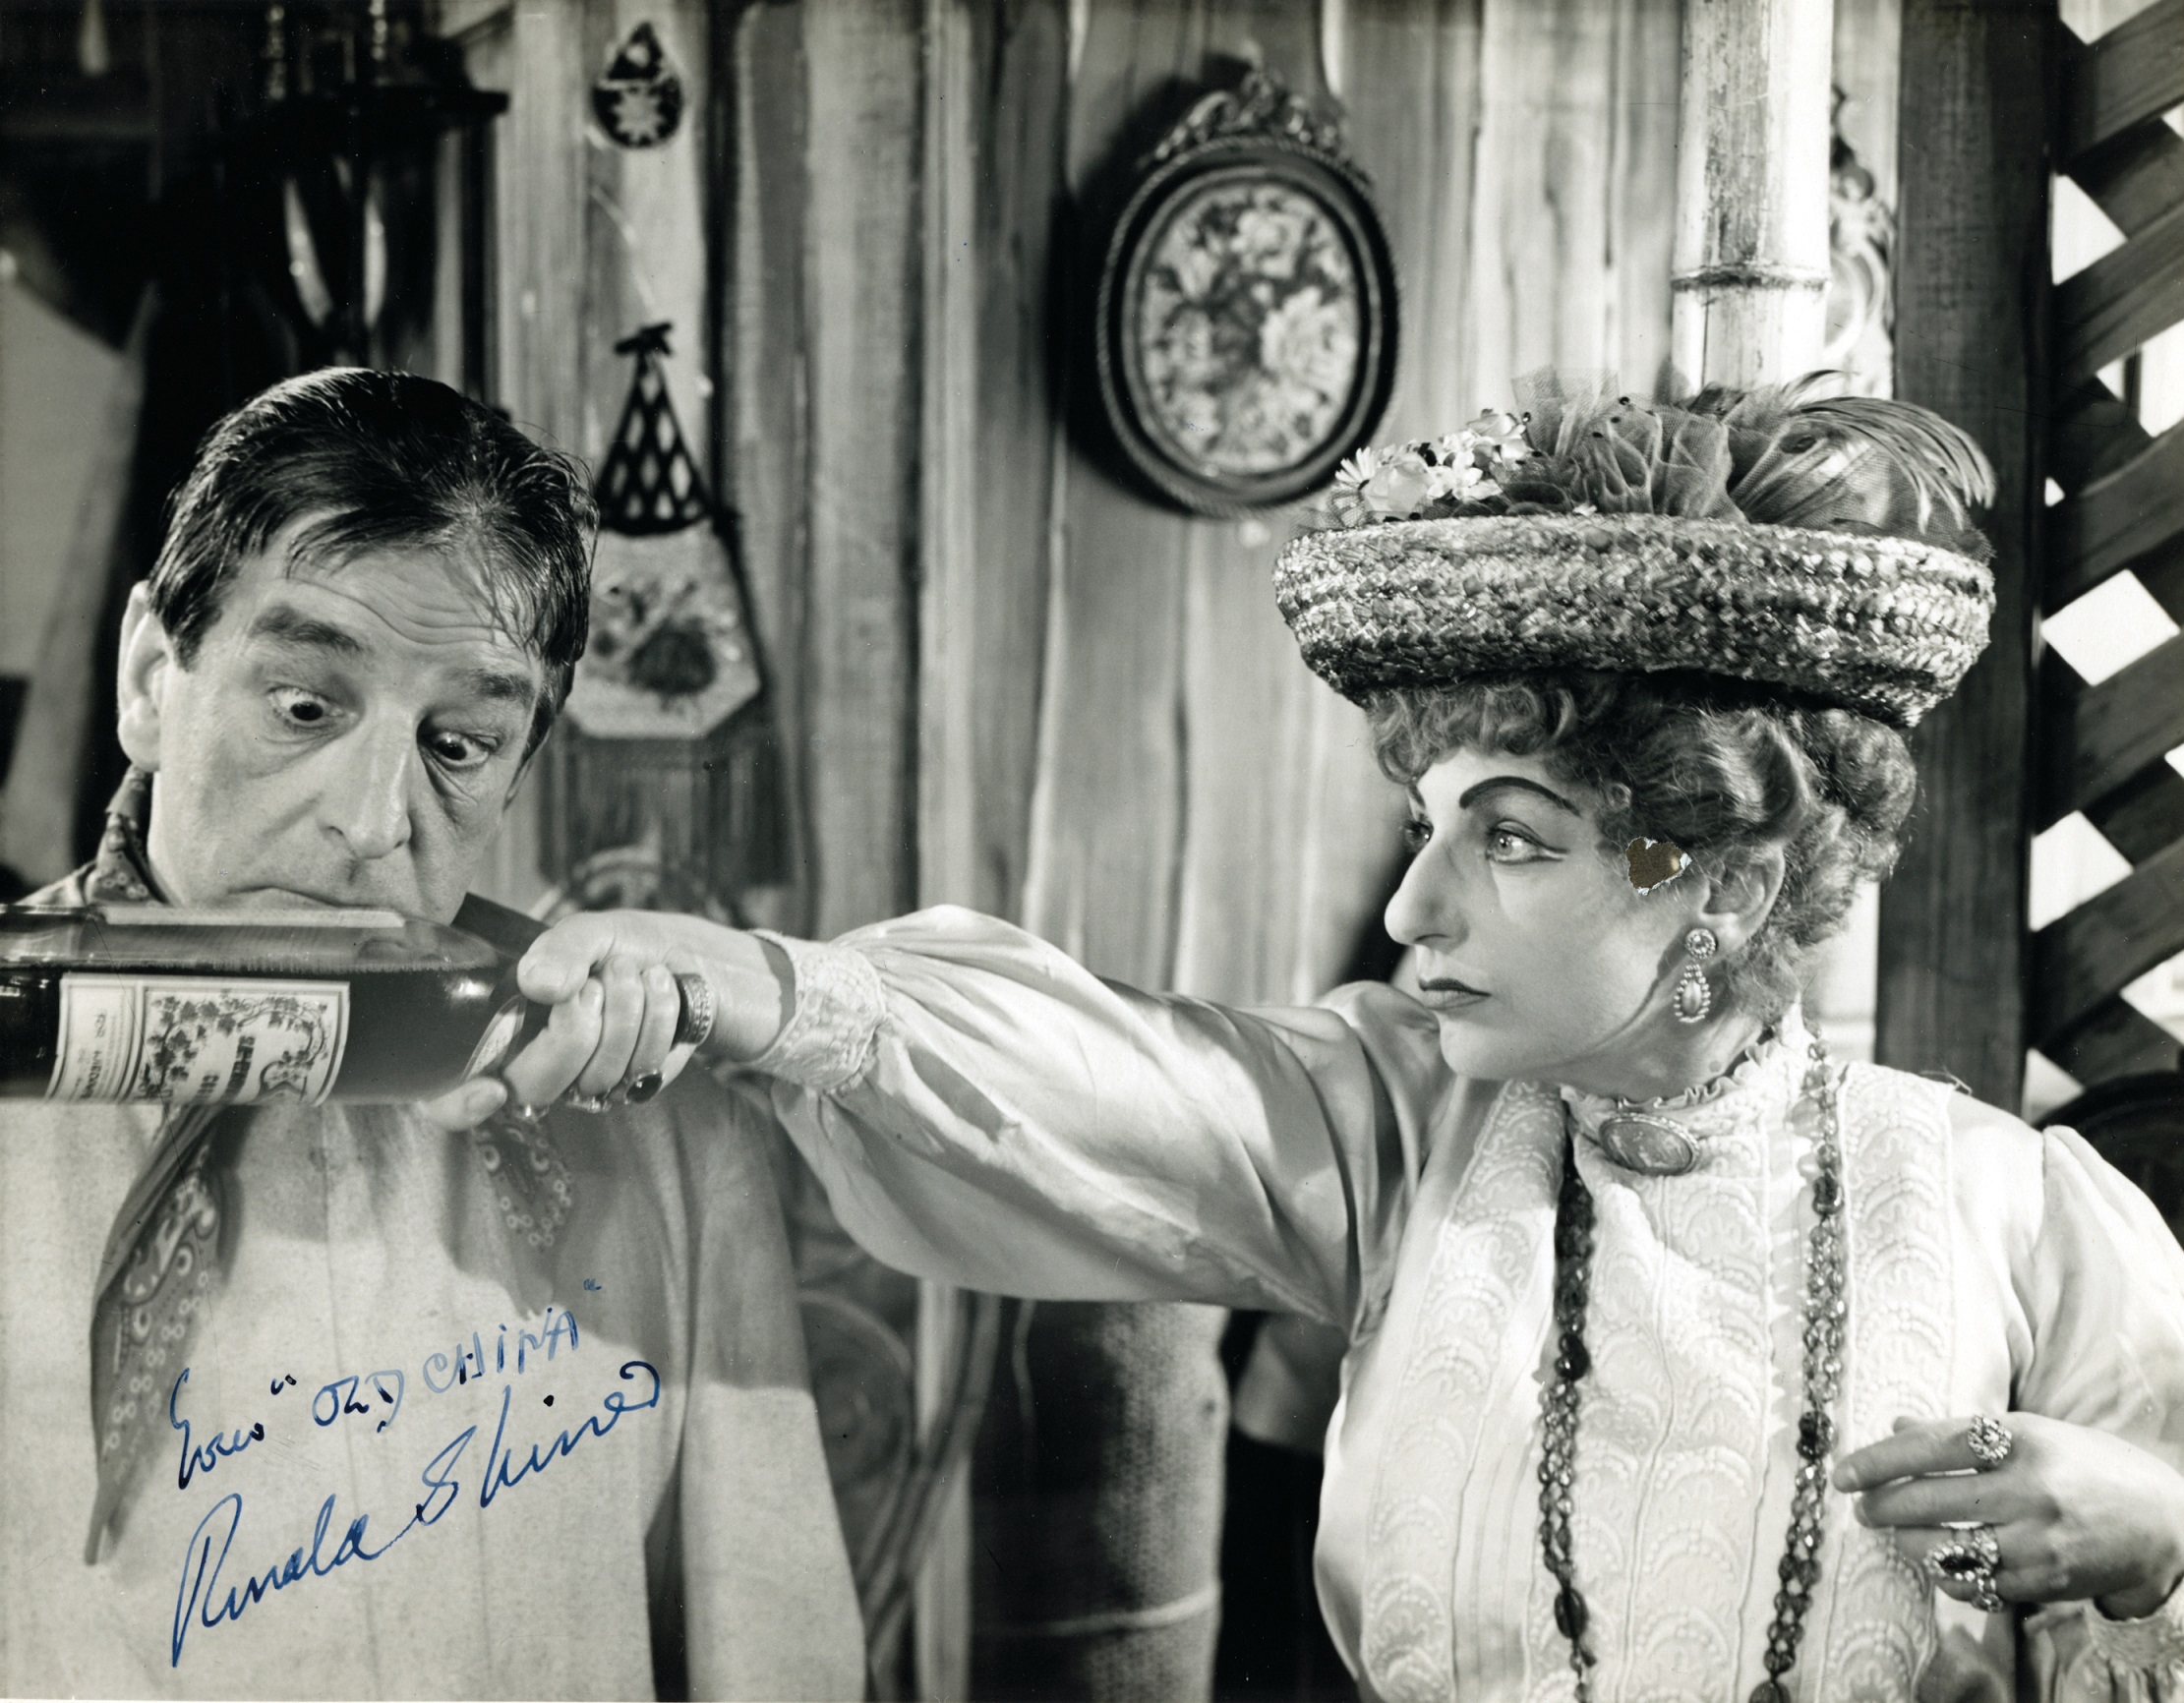 Joseph looking at a bottle held by Madame Parole in her right hand with arm stretched out. Photograph signed by Ronald Shine.